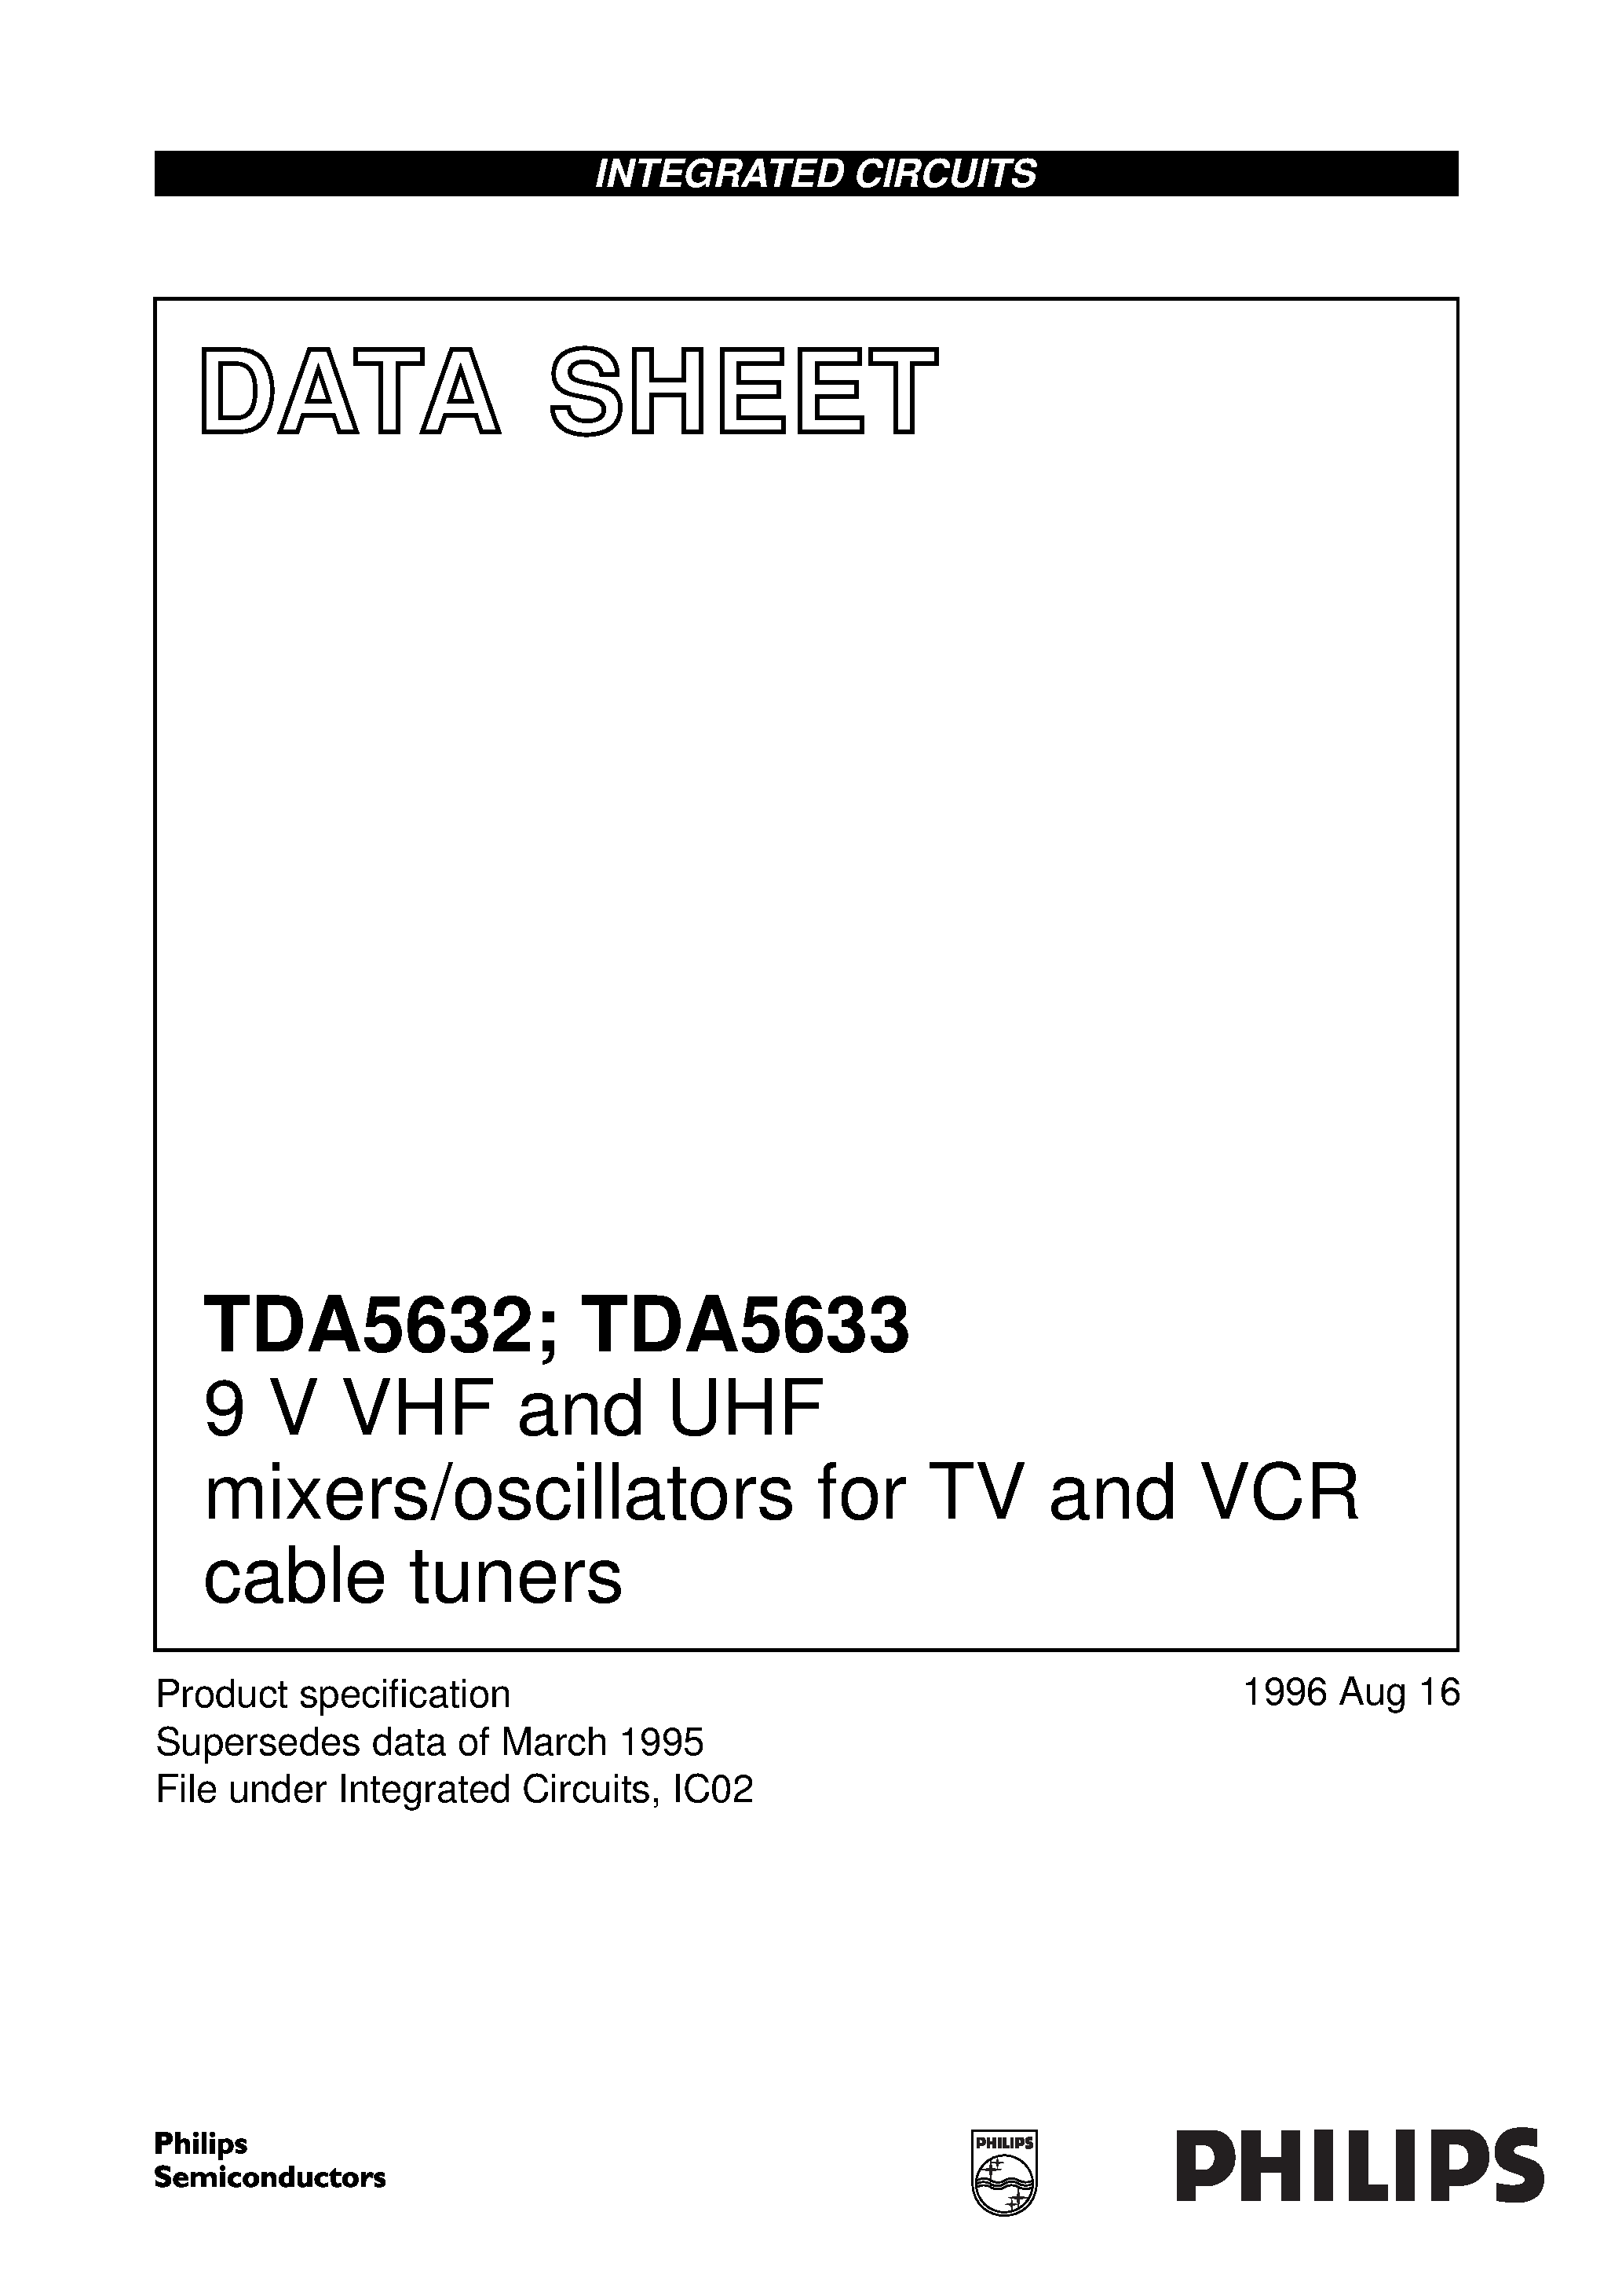 Datasheet TDA5632 - 9 V VHF and UHF mixers/oscillators for TV and VCR cable tuners page 1